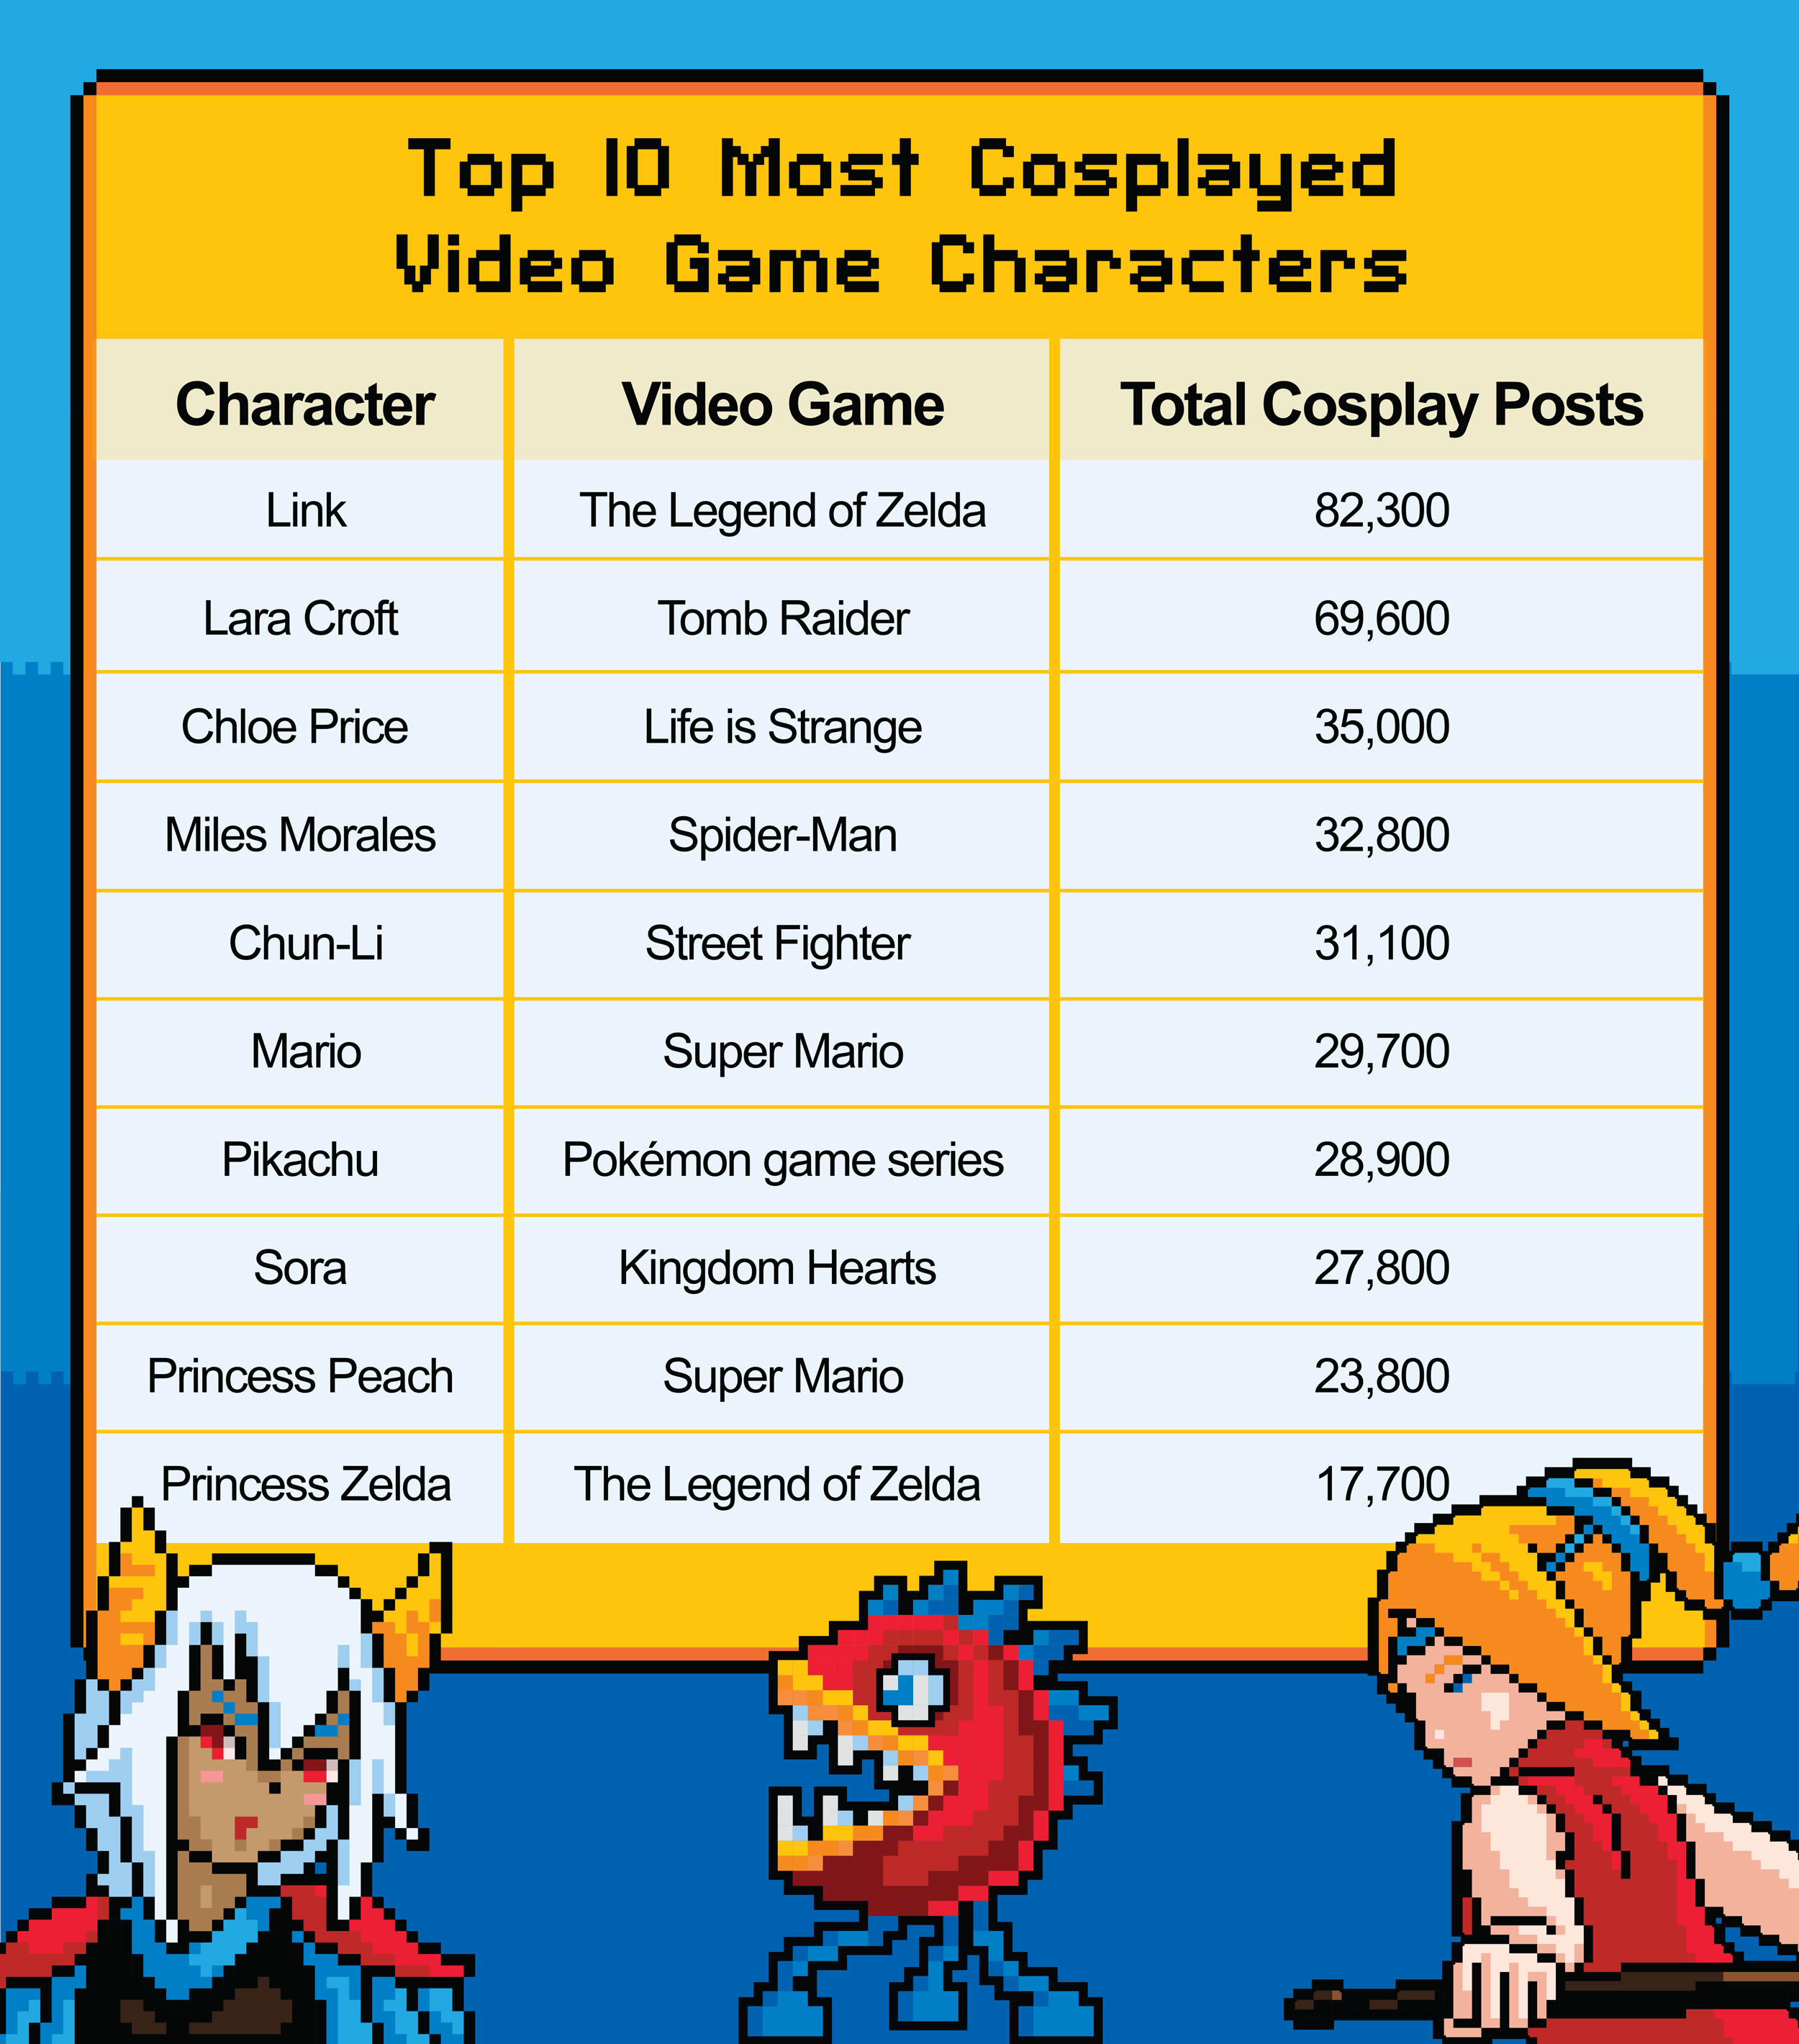 Top 10 most cosplayed Video Game characters